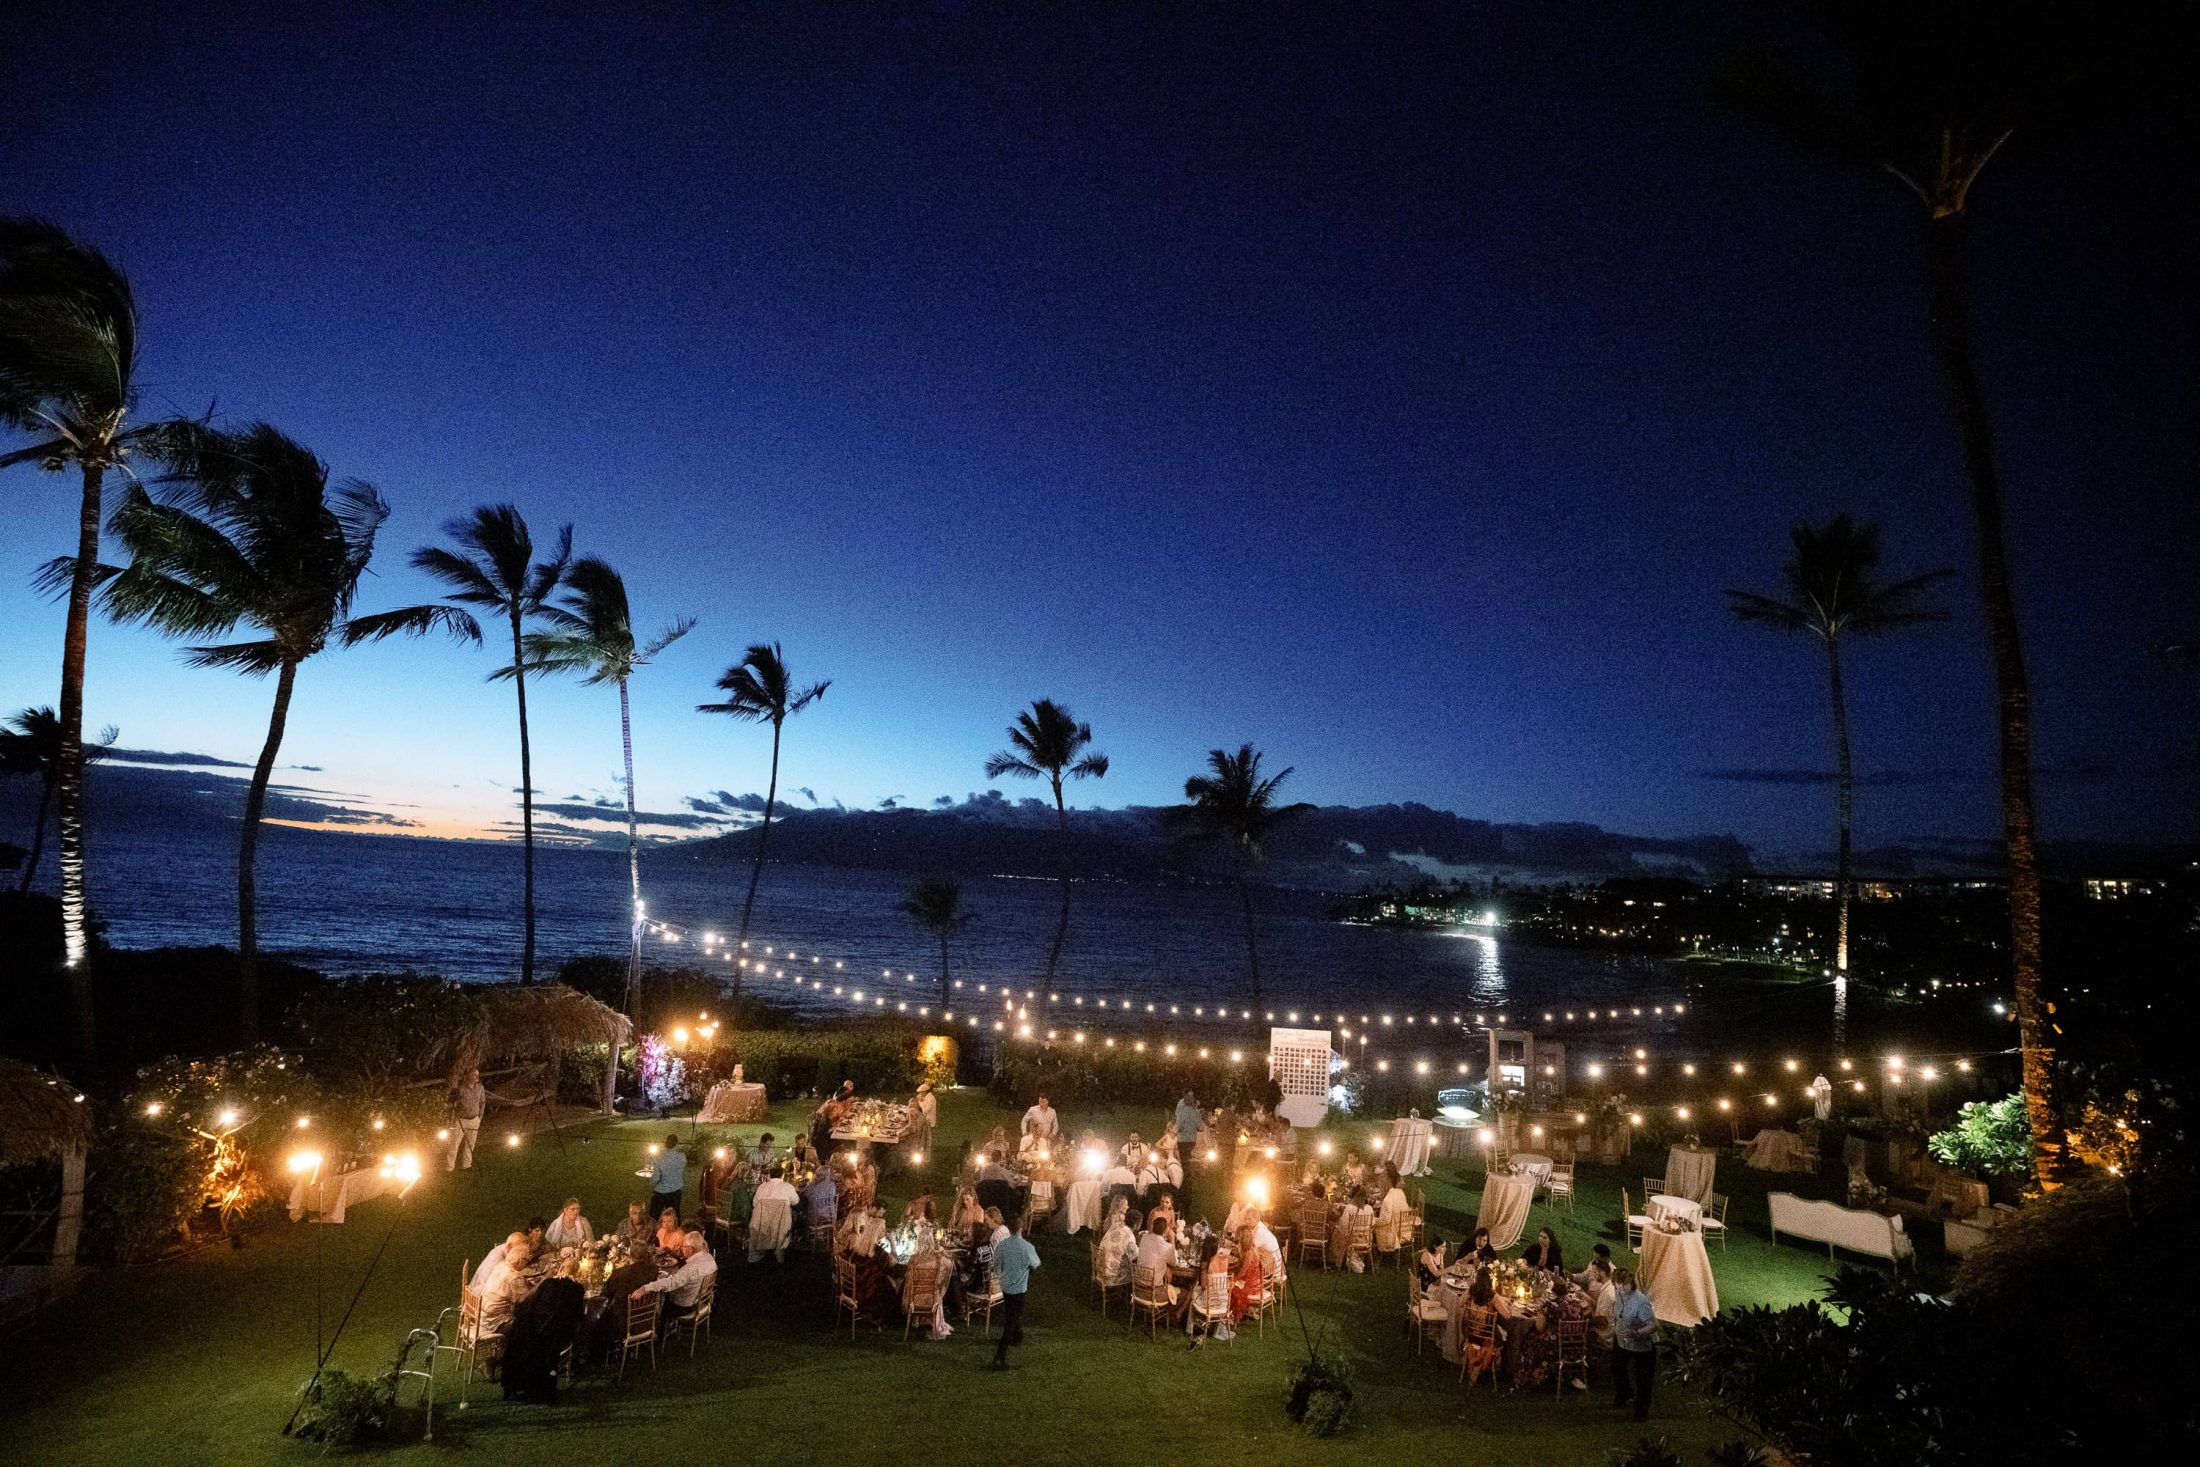 Reception at night under twinkling lights at Maui wedding at Four Seasons Resort Maui in Wailea, Hawaii | Photo by James x Schulze